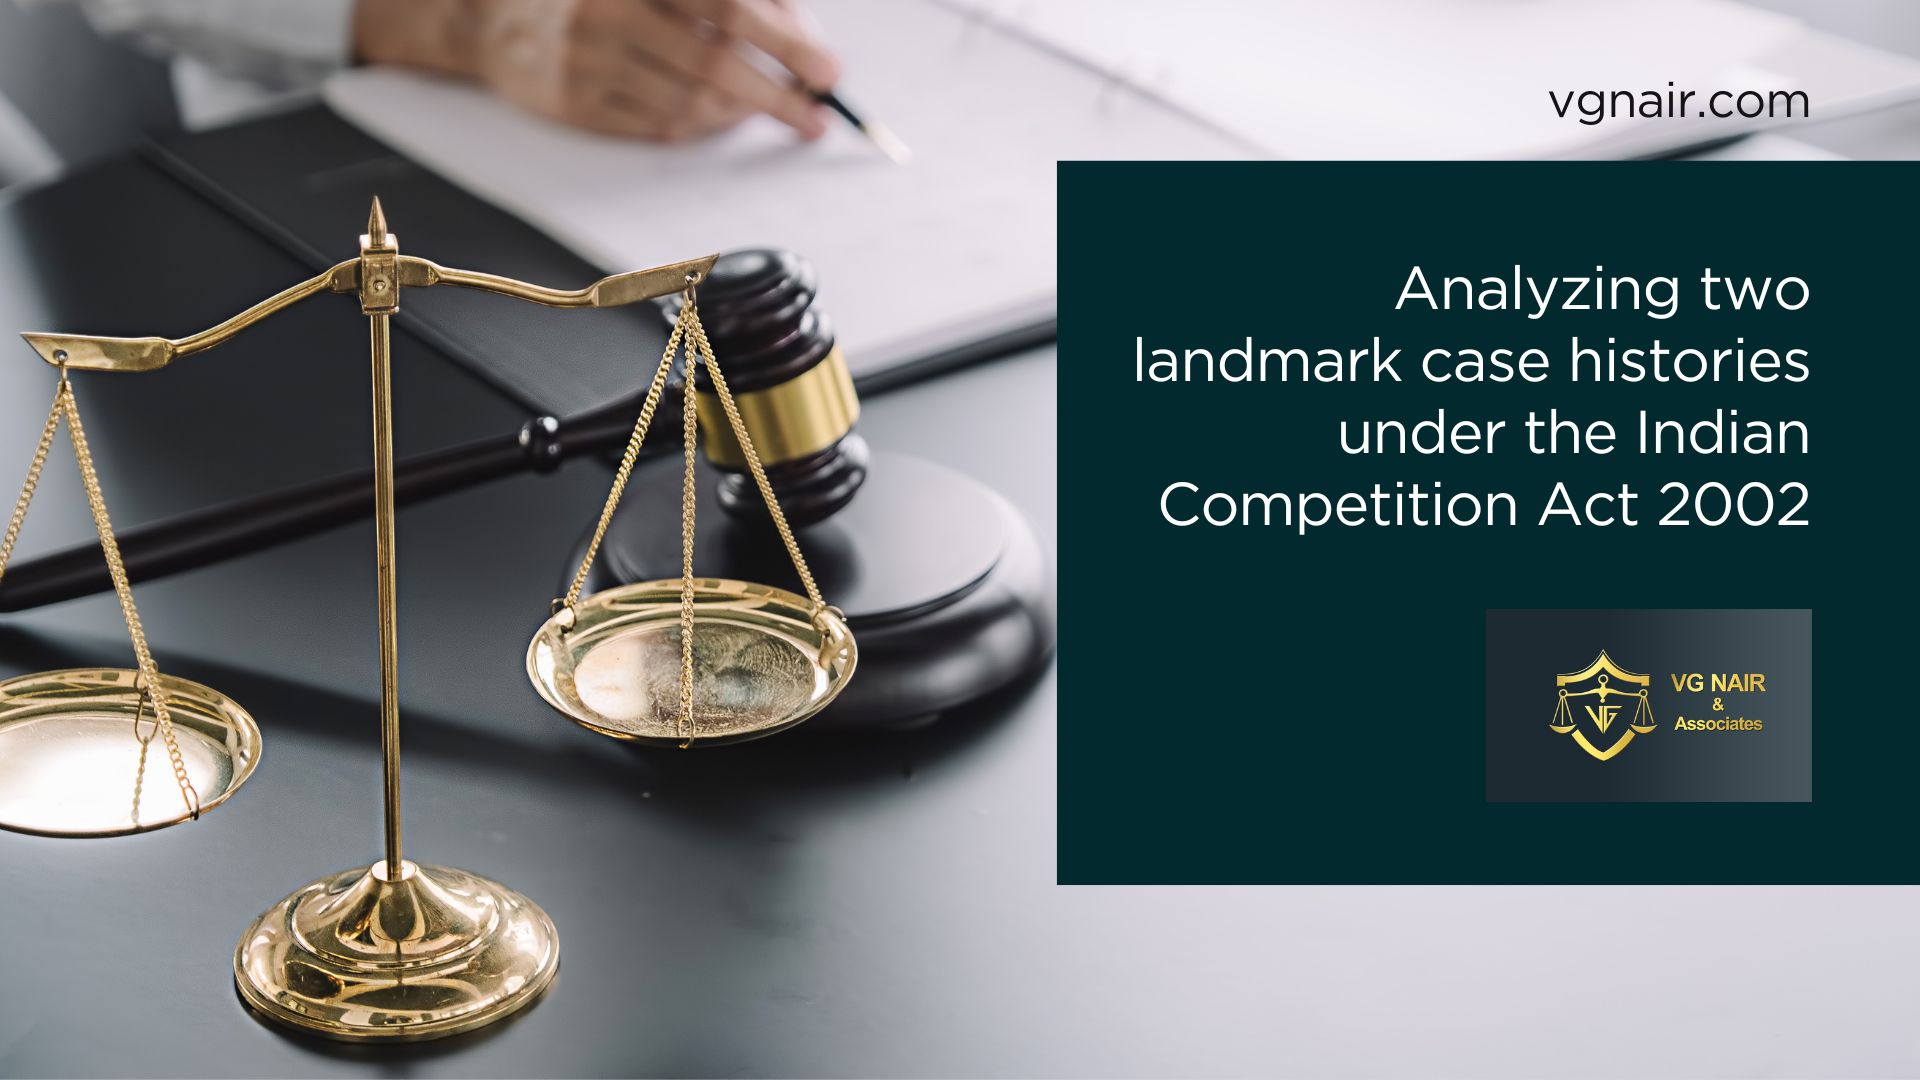 Analyzing Two Landmark Case Histories under the Indian Competition Act 2002